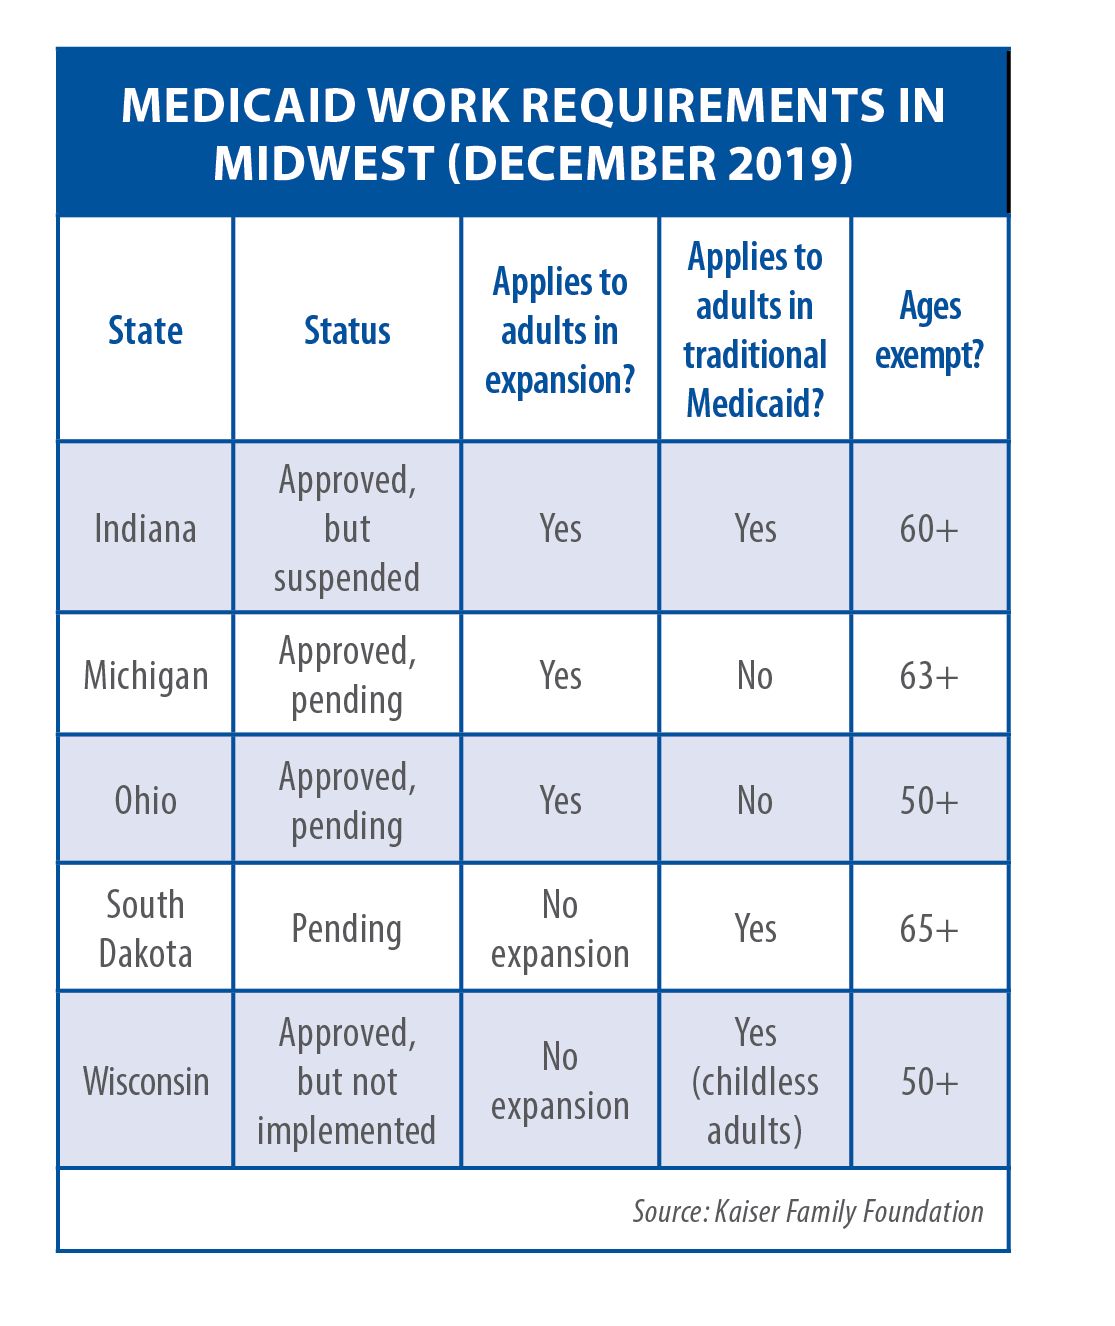 Table listing Midwestern states' Medicaid work requirements as of December 2019